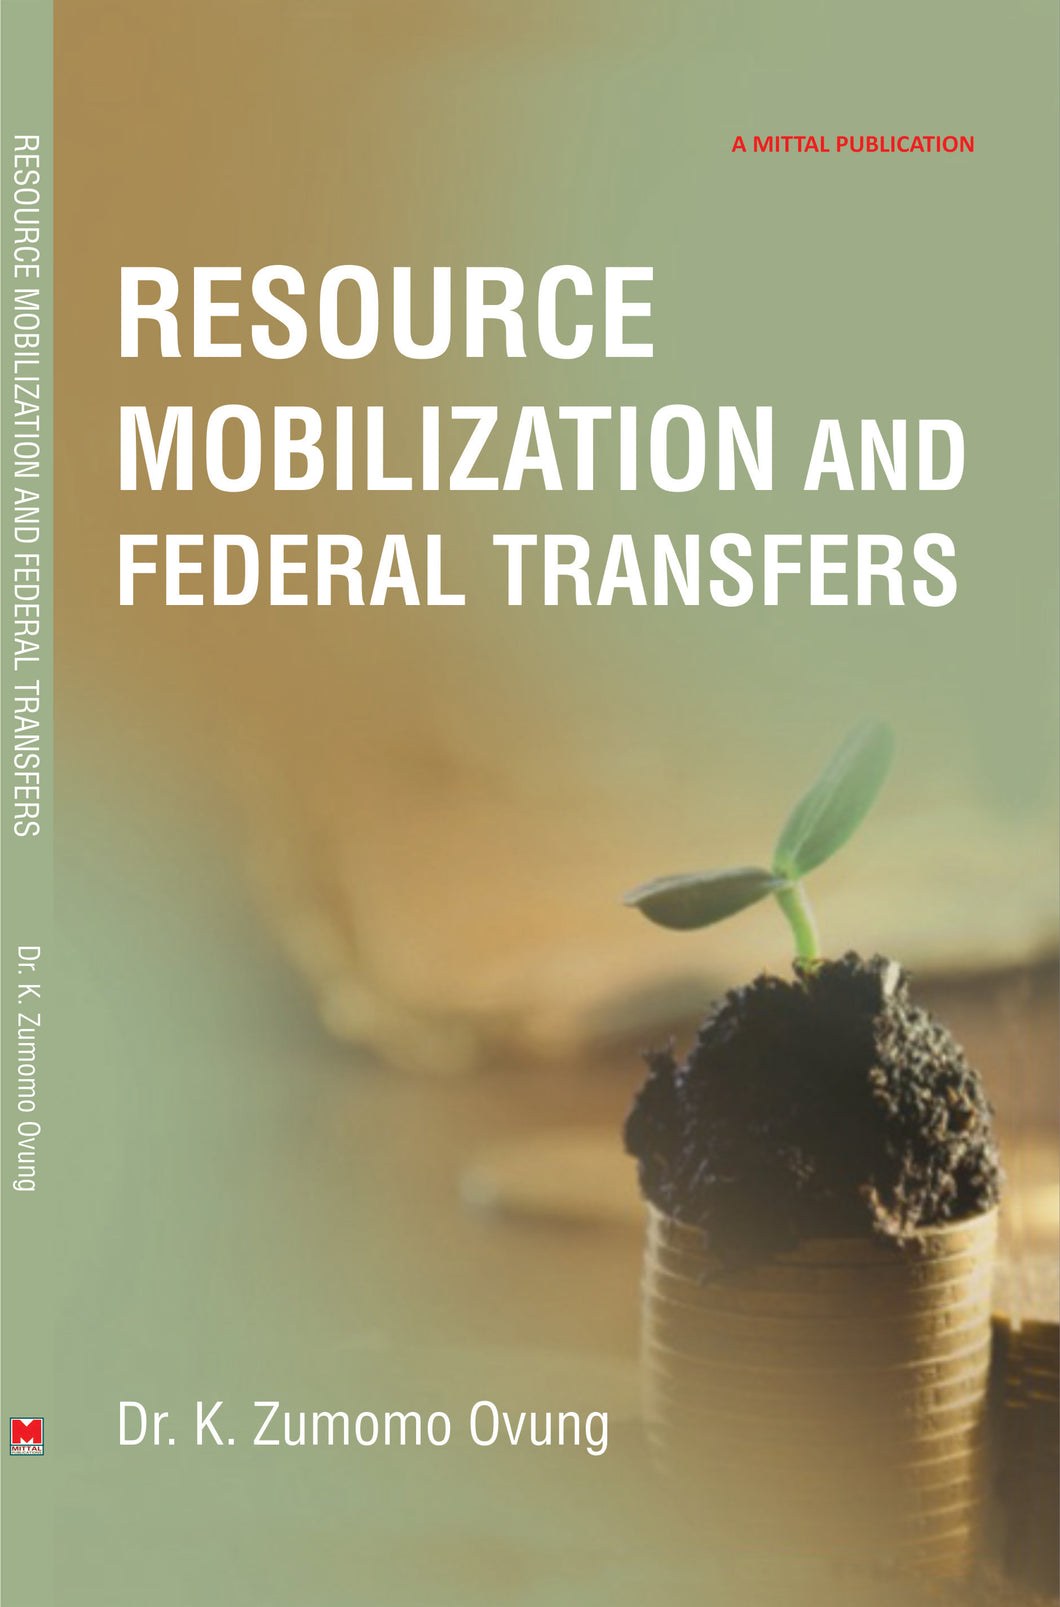 Resource Mobilization and Federal Transfers by Dr. K. Zumomo Ovung